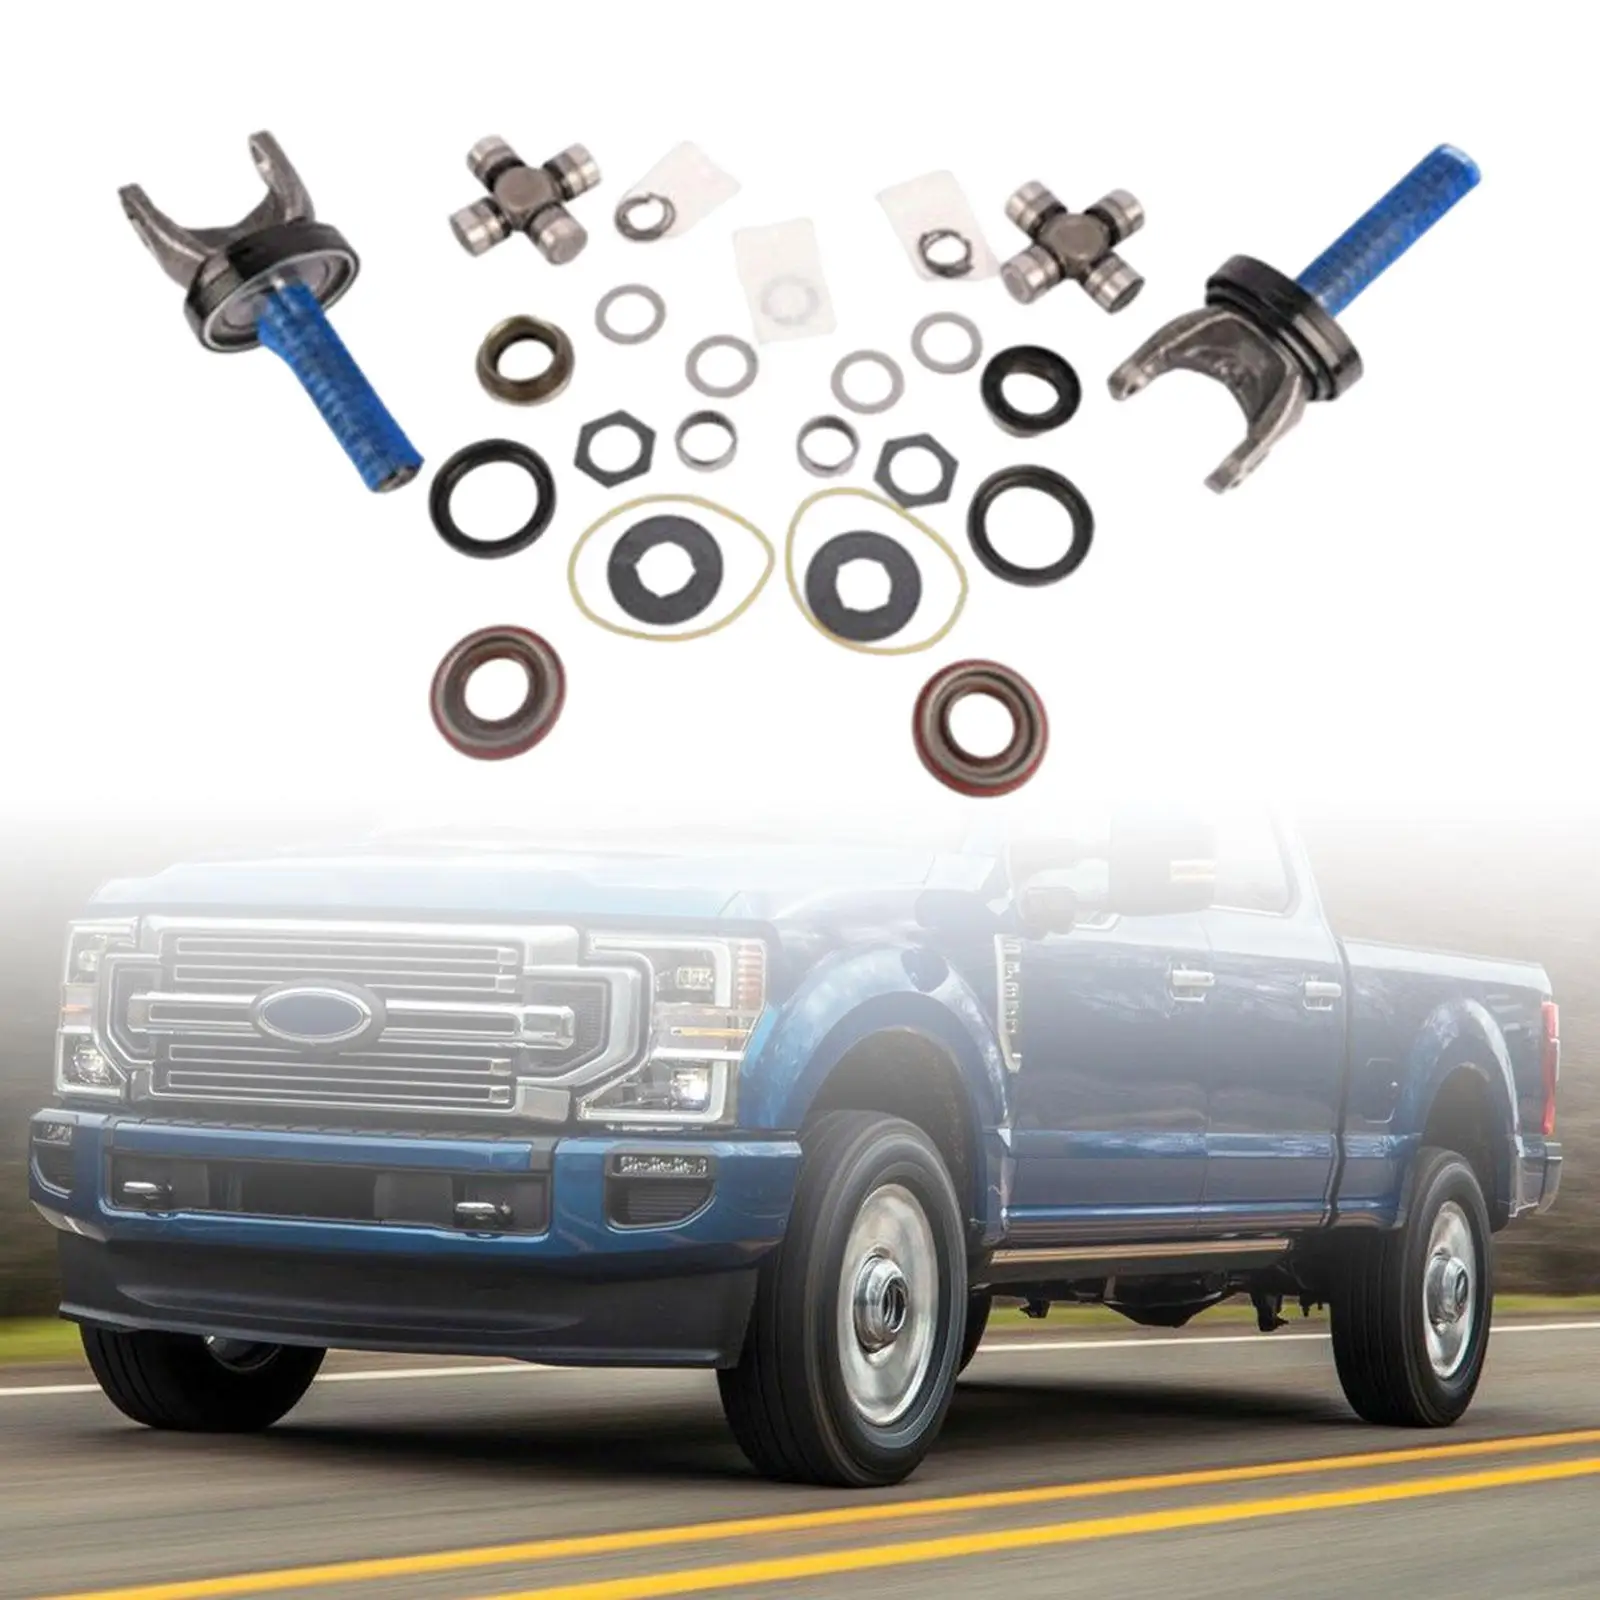 Front Axle Shaft Seal and Bearing Kit 700238-2x 50491 for Ford Super Duty F250 F350 1998-2004 Directly Replace High Quality